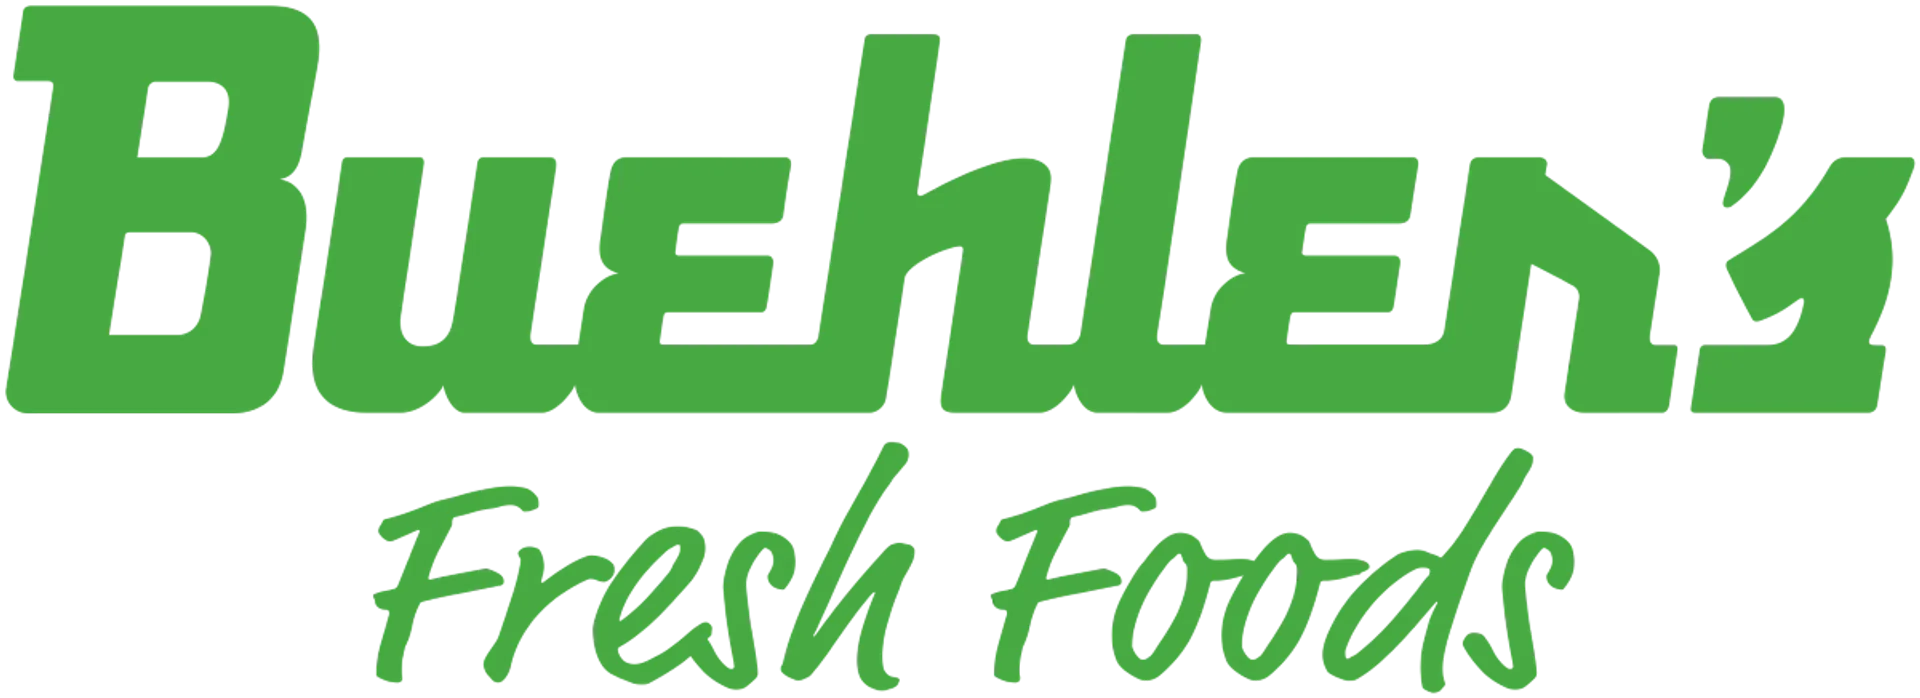 BUEHLER'S FRESH FOODS logo current weekly ad